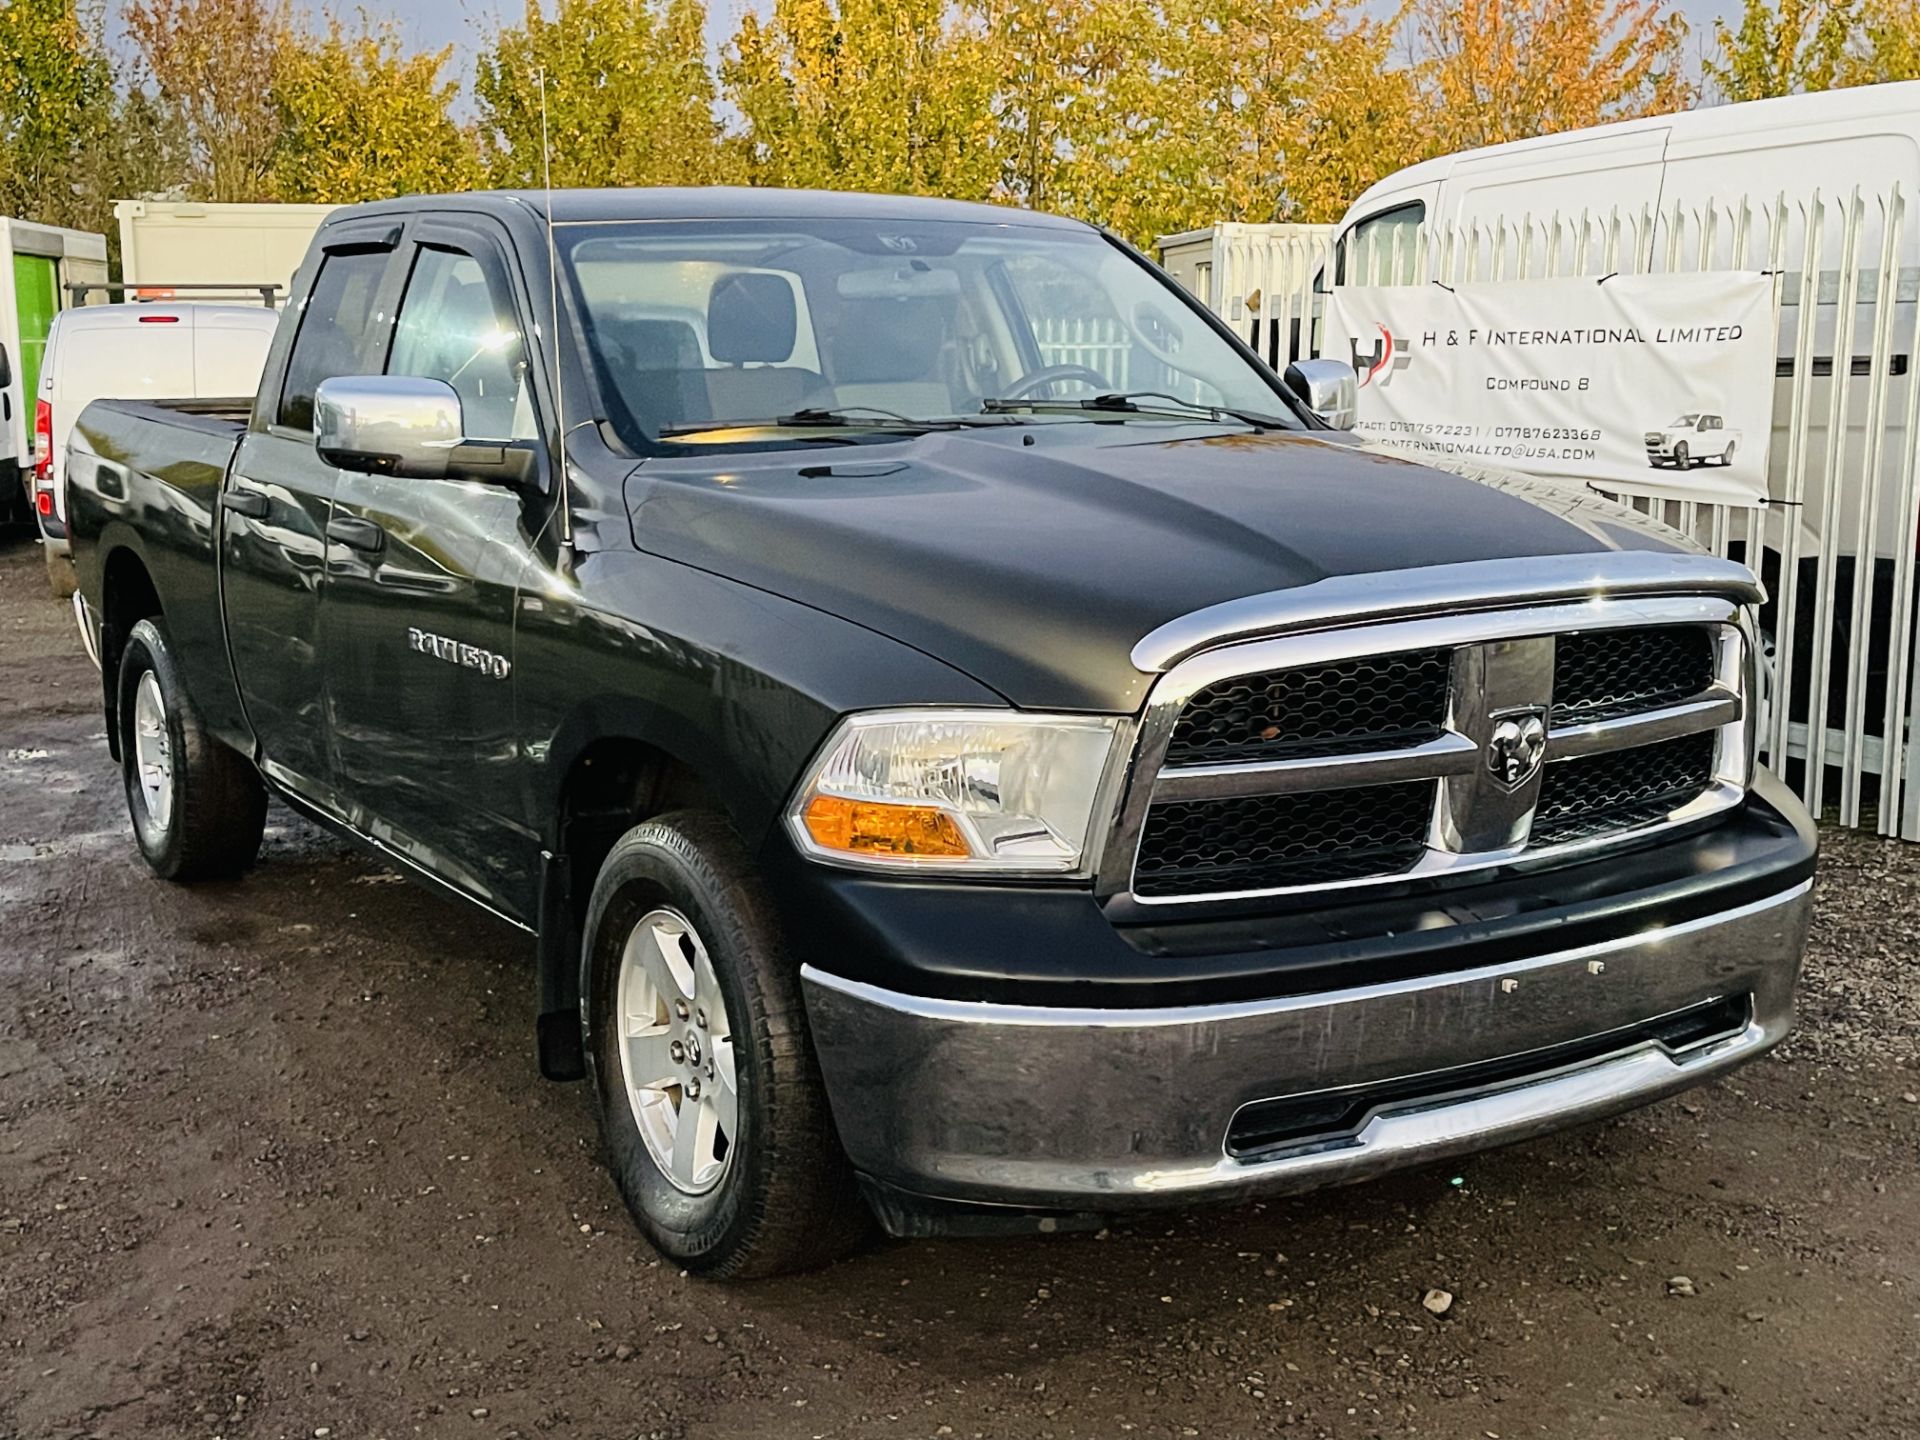 Dodge Ram 4.7 V8 1500 ST 4WD ' 2012 Year ' A/C - Cruise Control - 6 Seats - Image 6 of 27